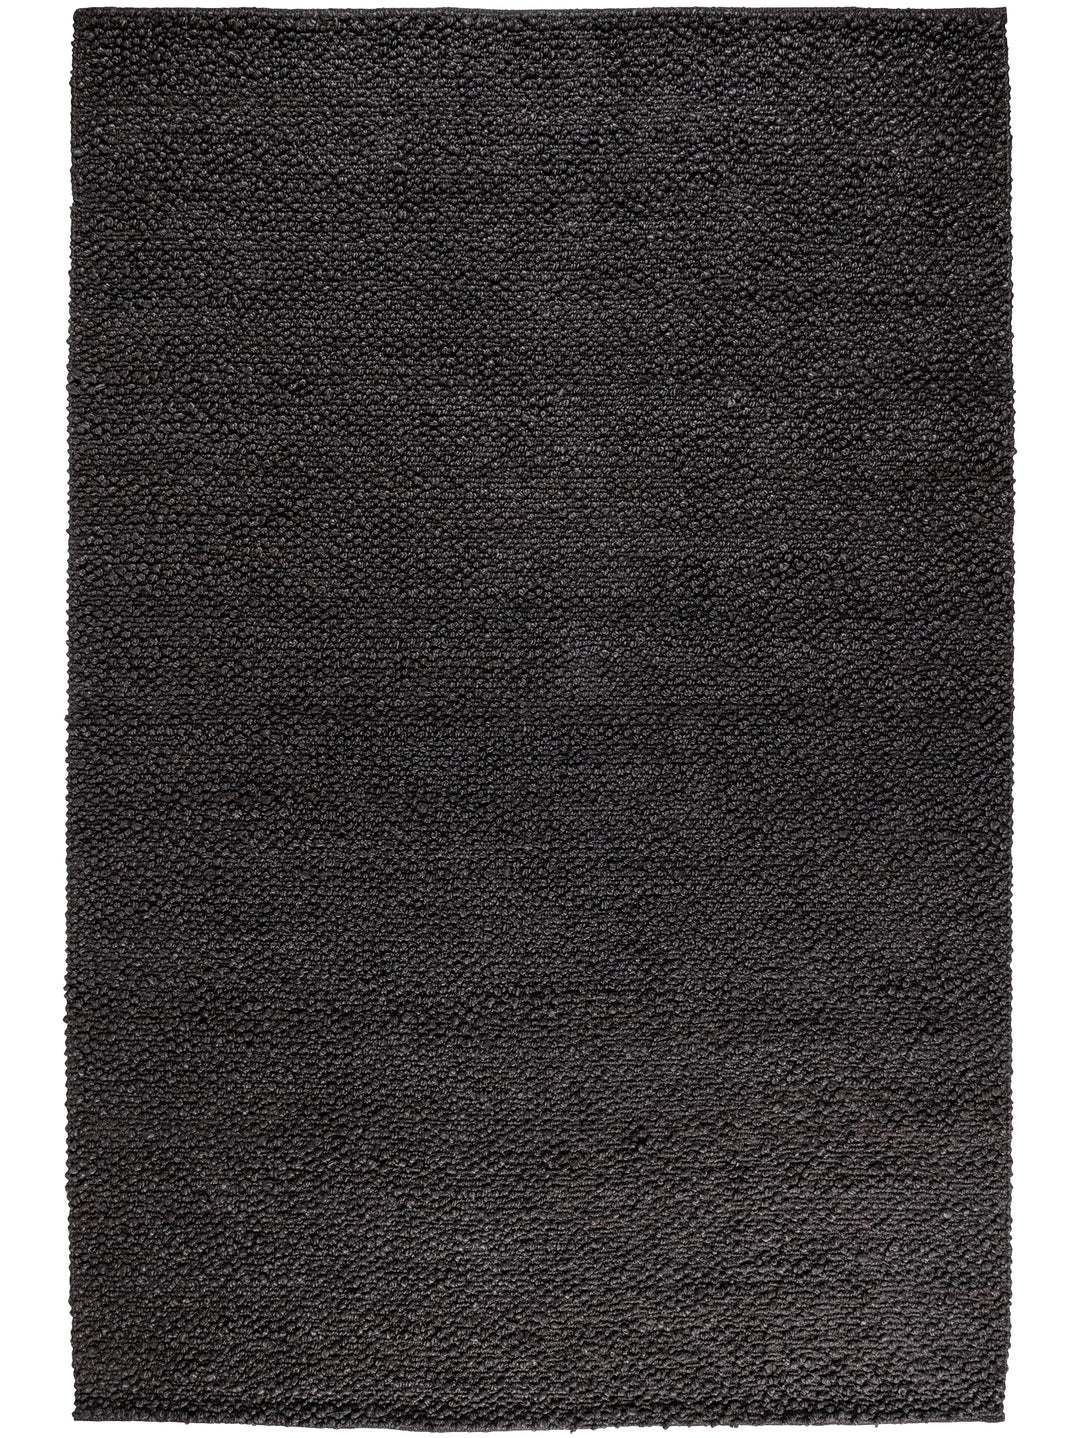 French Boucle Rug in Midnight